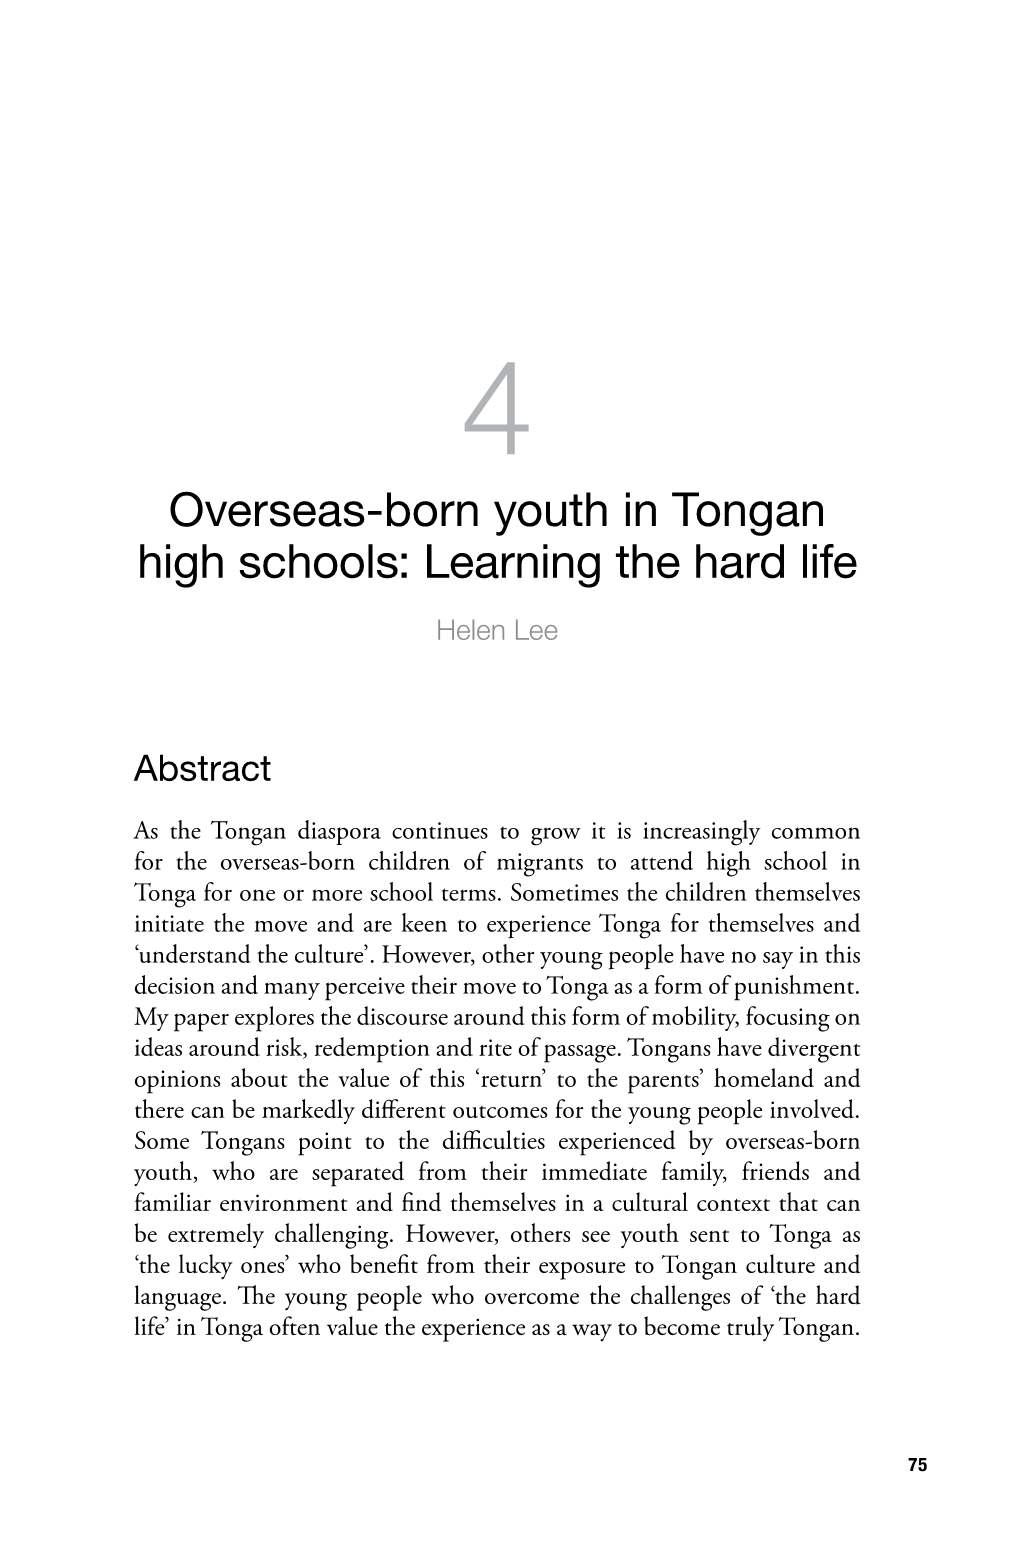 4. Overseas-Born Youth in Tongan High Schools Who They May Not Have Met Before Going to Tonga